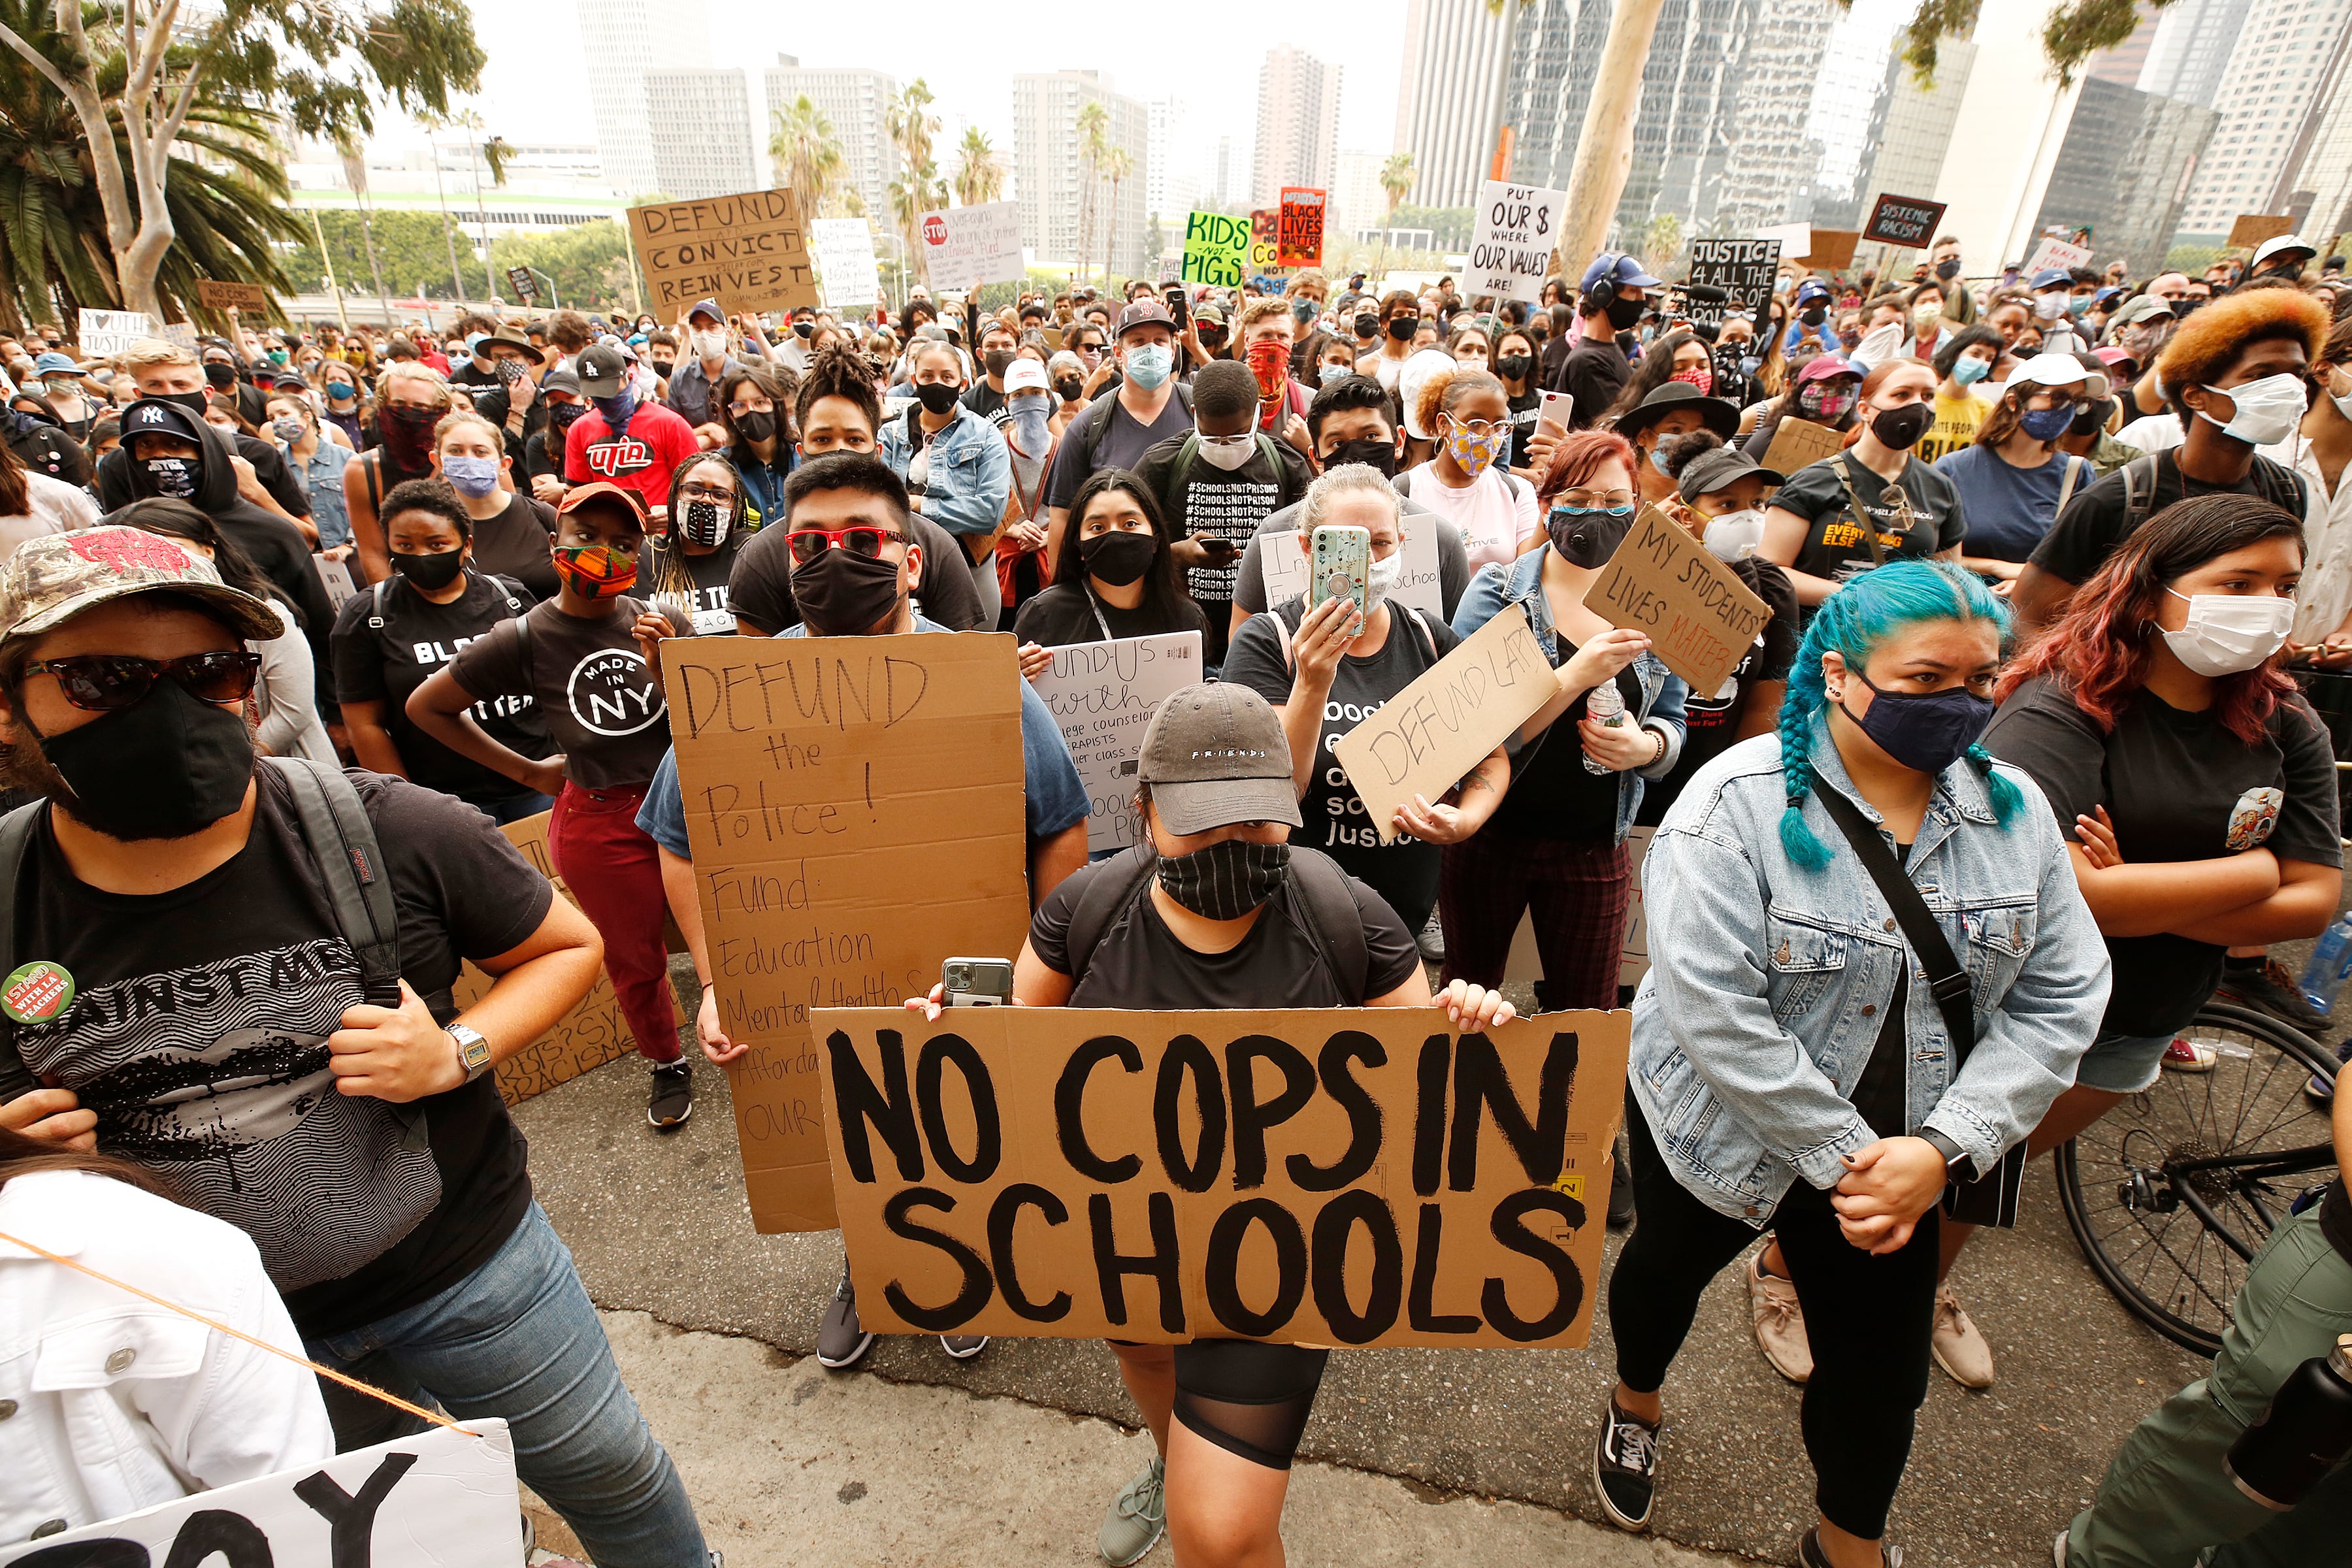 Students and community members will march Tuesday at 10 a.m. from Miguel Contreras Learning Complex, most likely to LAUSD headquarters, to urge LAUSD to defund school police and eliminate their budget.